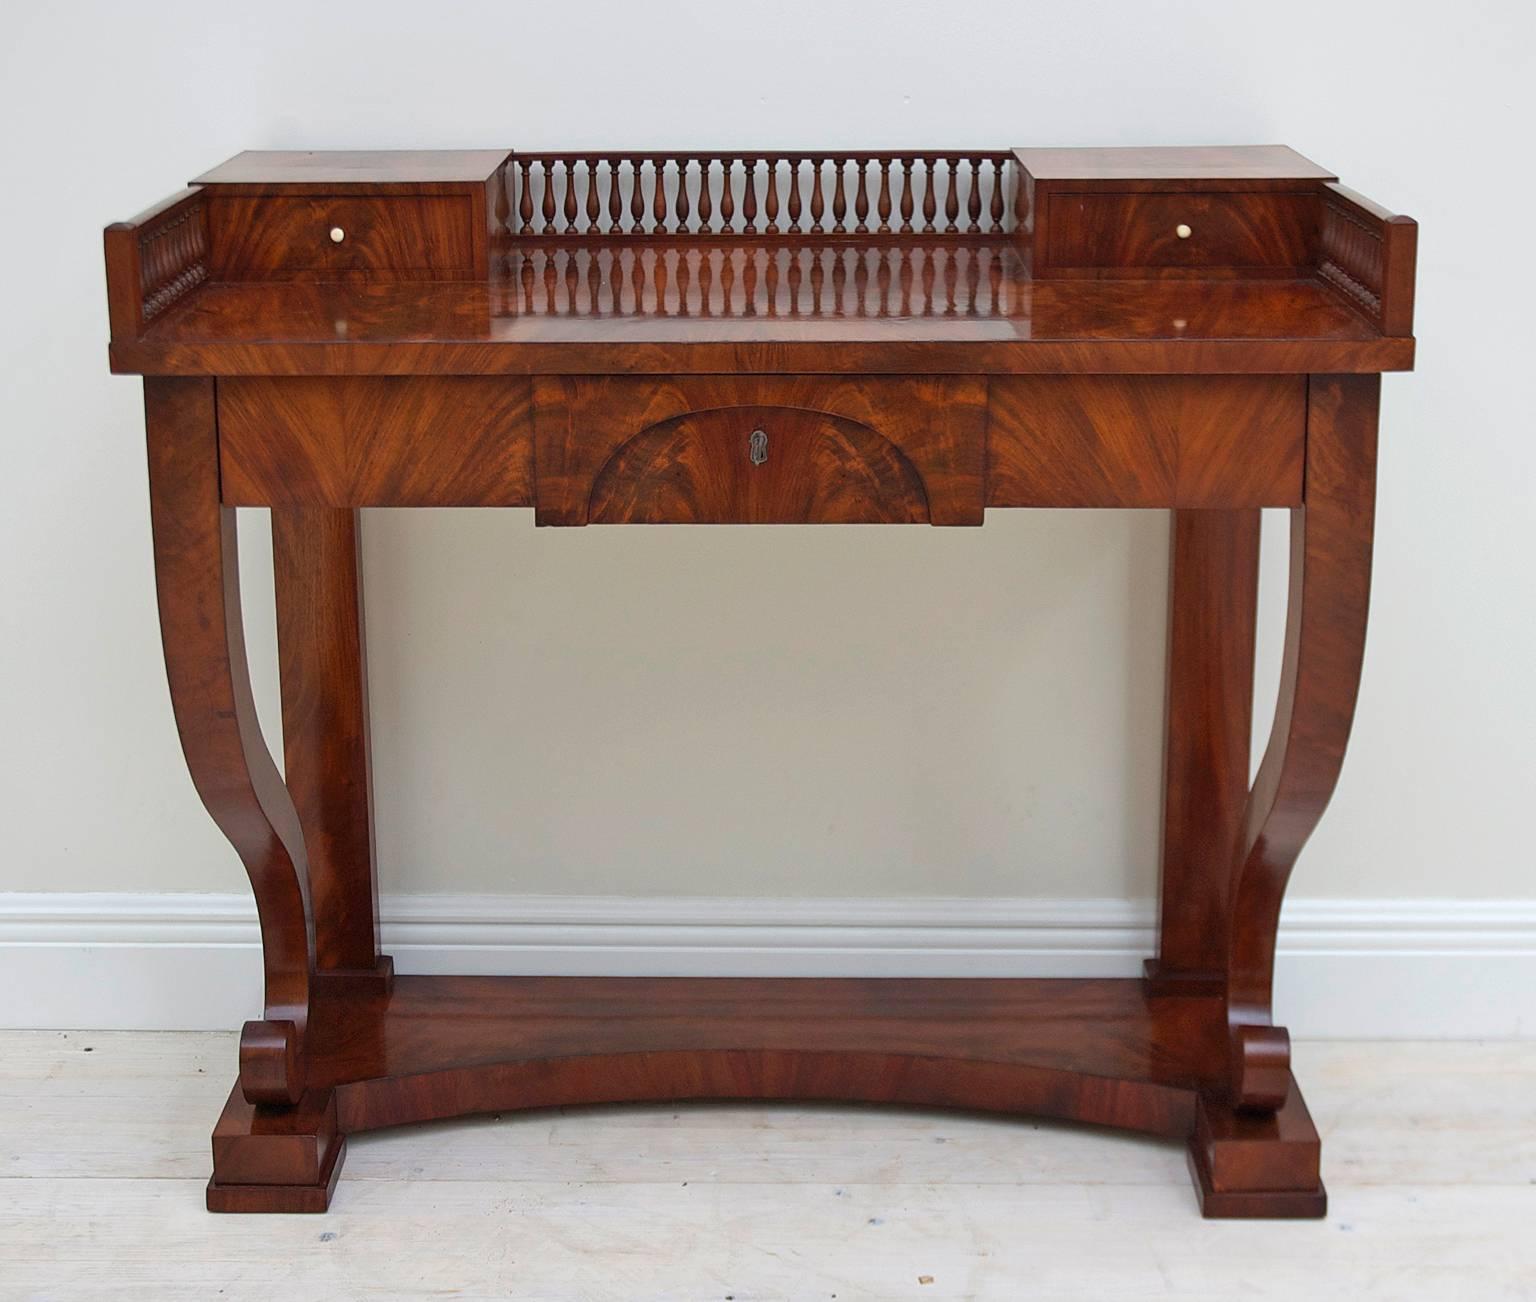 A very lovely Swedish Empire Karl Johan writing desk or dressing table in West Indies mahogany with two small drawers flanking a center gallery and one long storage drawer on apron. Two volutes act as front supports and lend a graceful and light